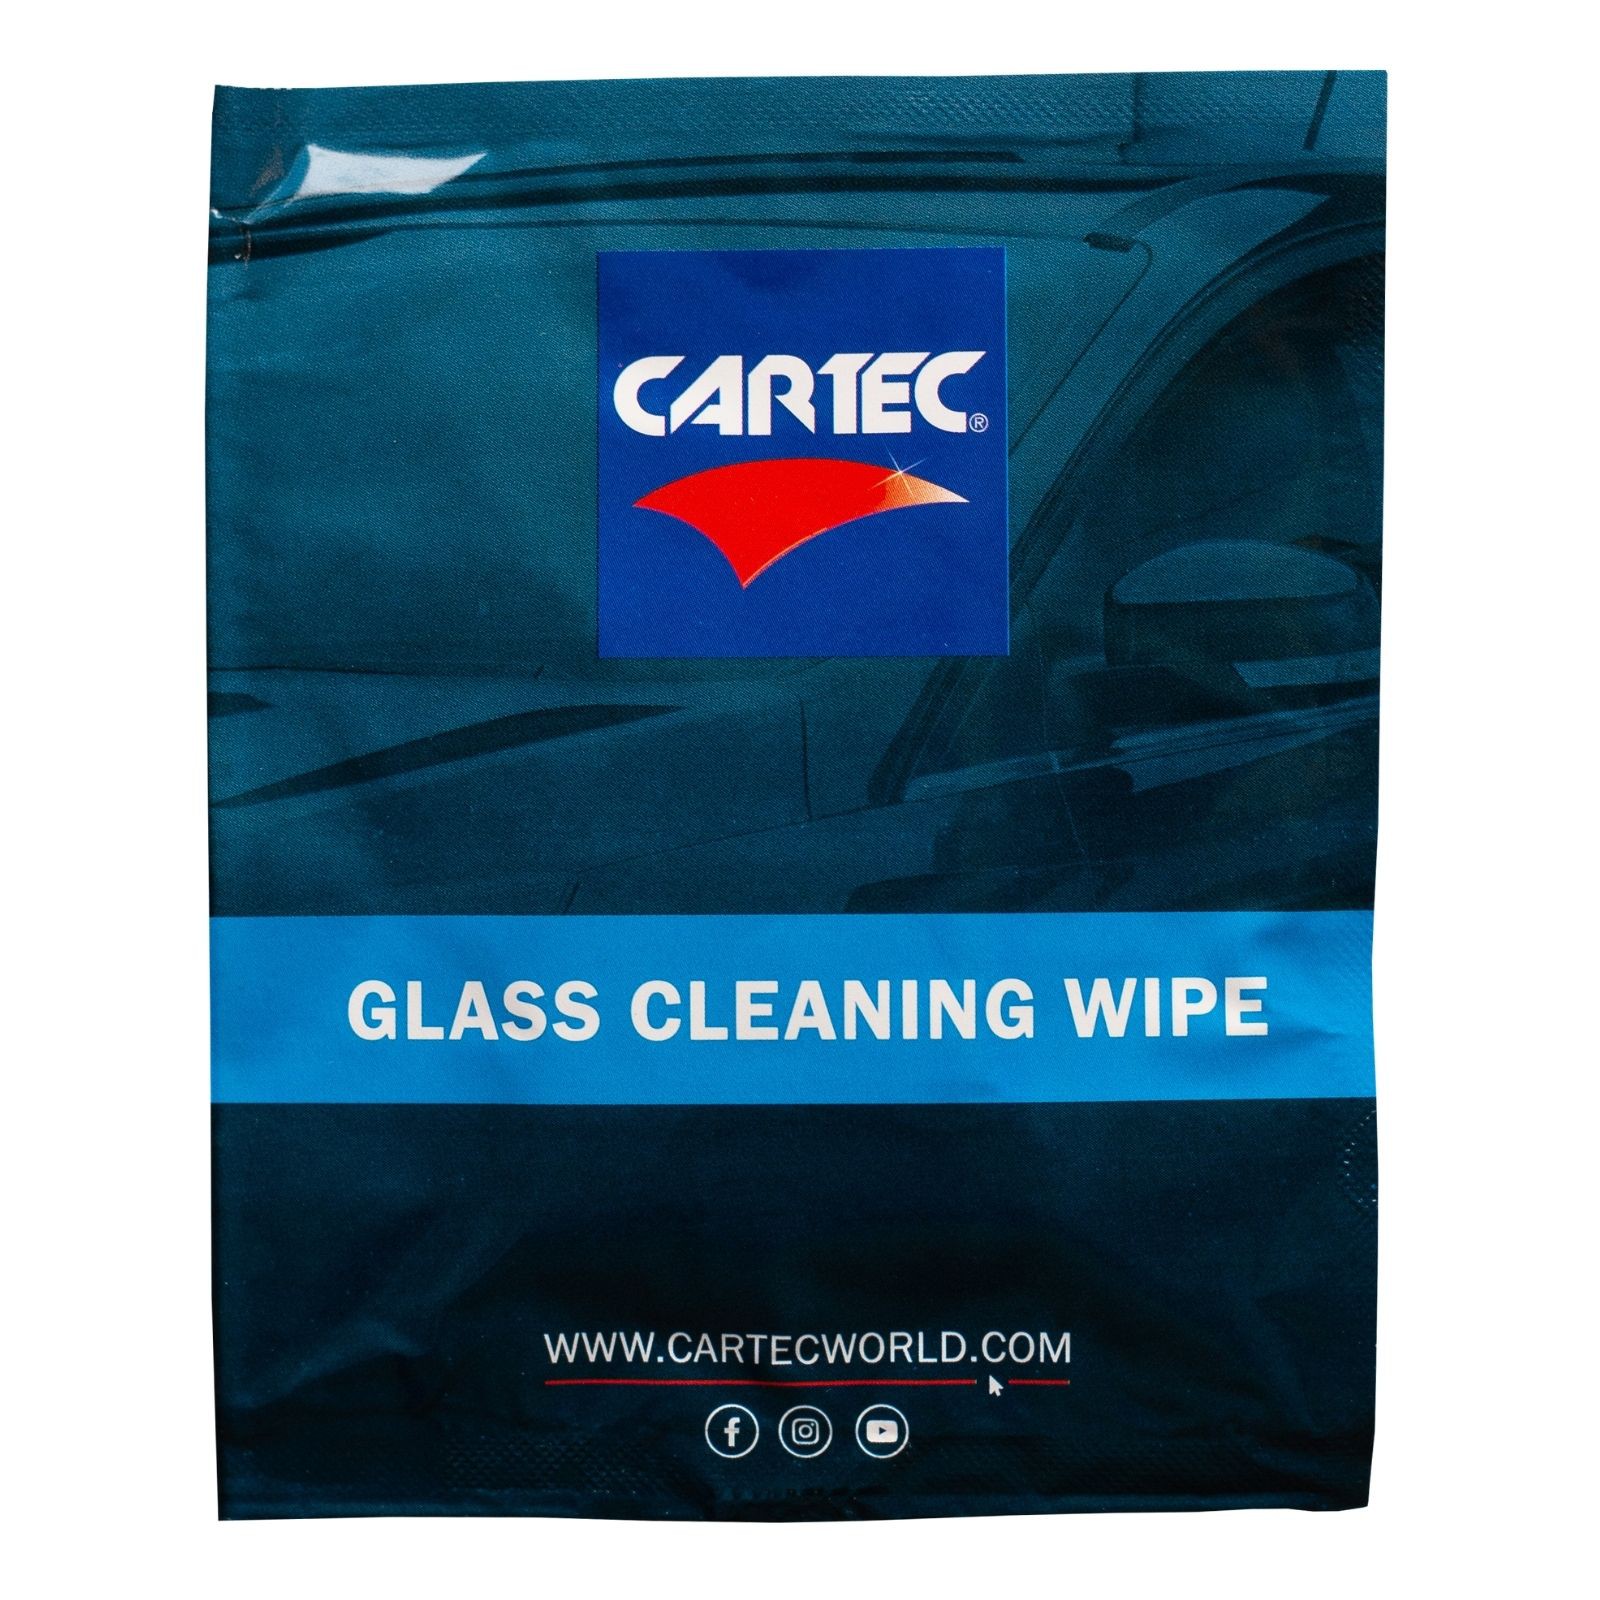 Glass Cleaning Wipe